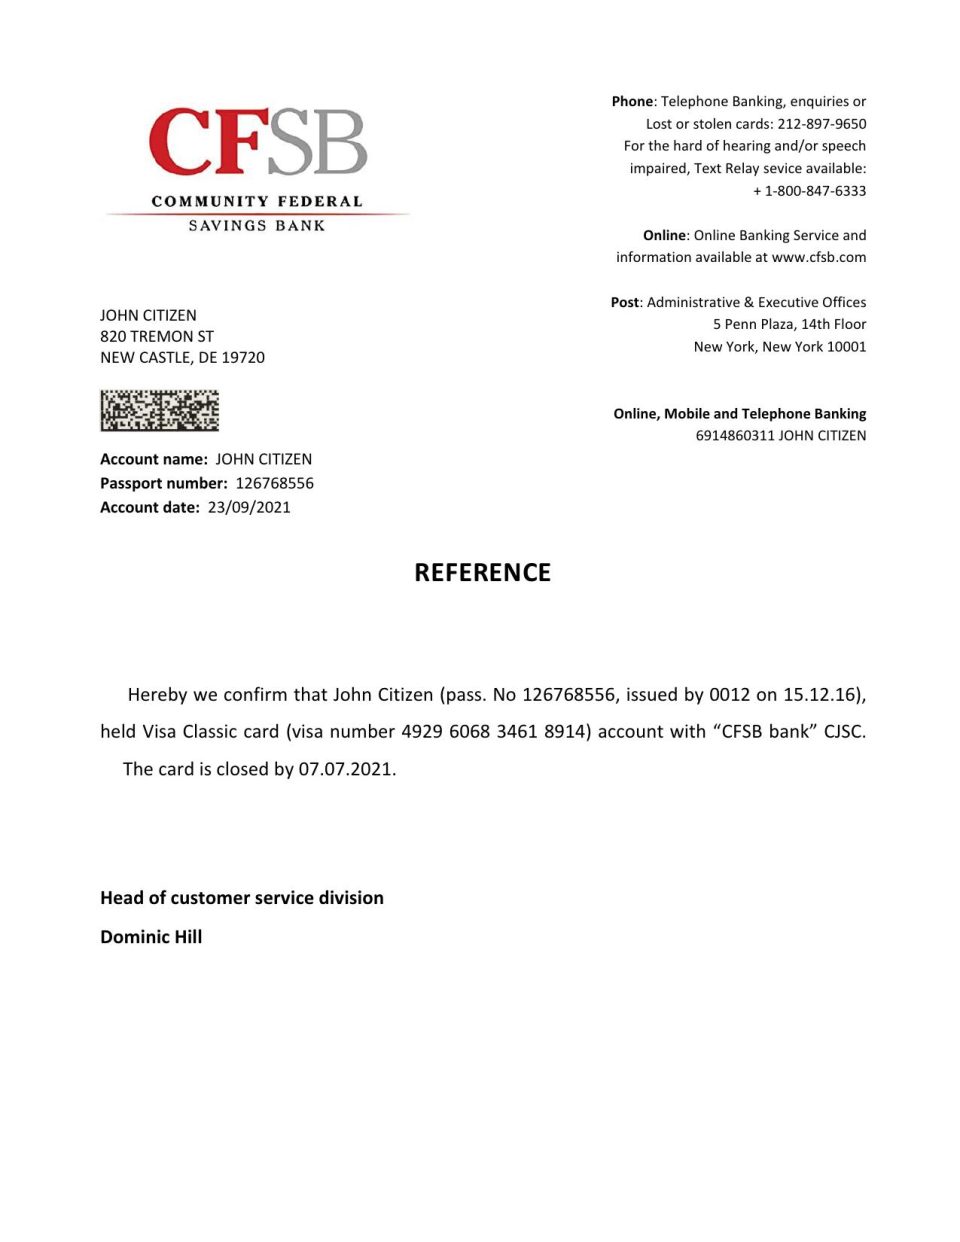 Download USA CFSB Bank Reference Letter Templates | Editable Word